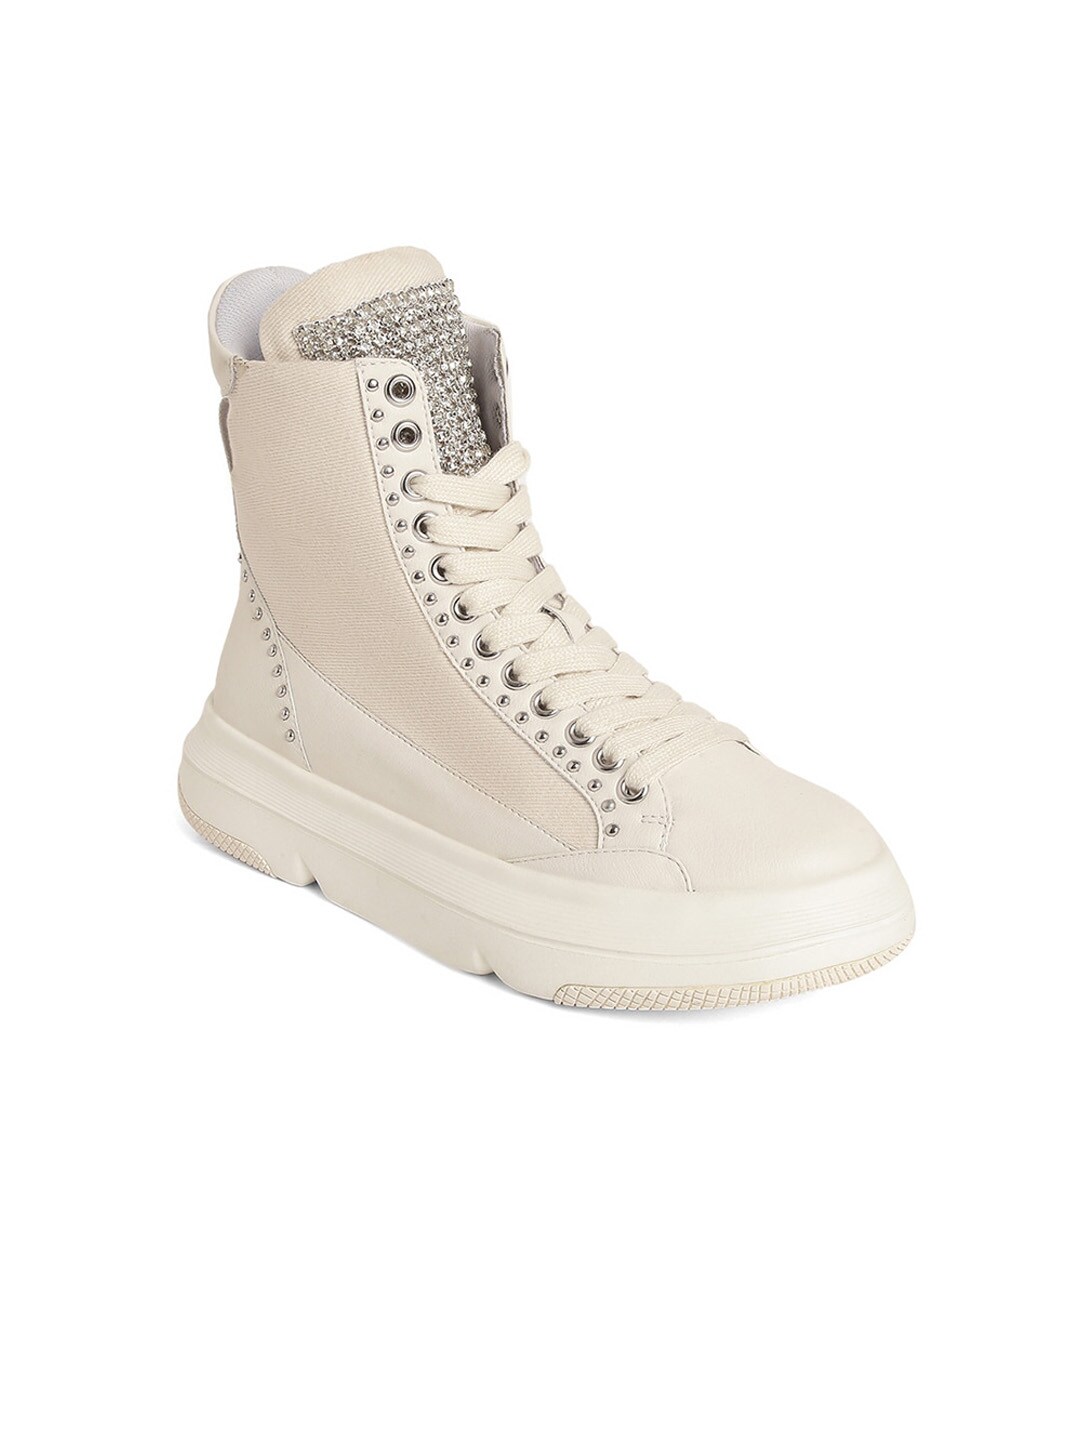 Saint G Women Off White Embellished Mid-Top Lightweight Leather Sneakers Price in India